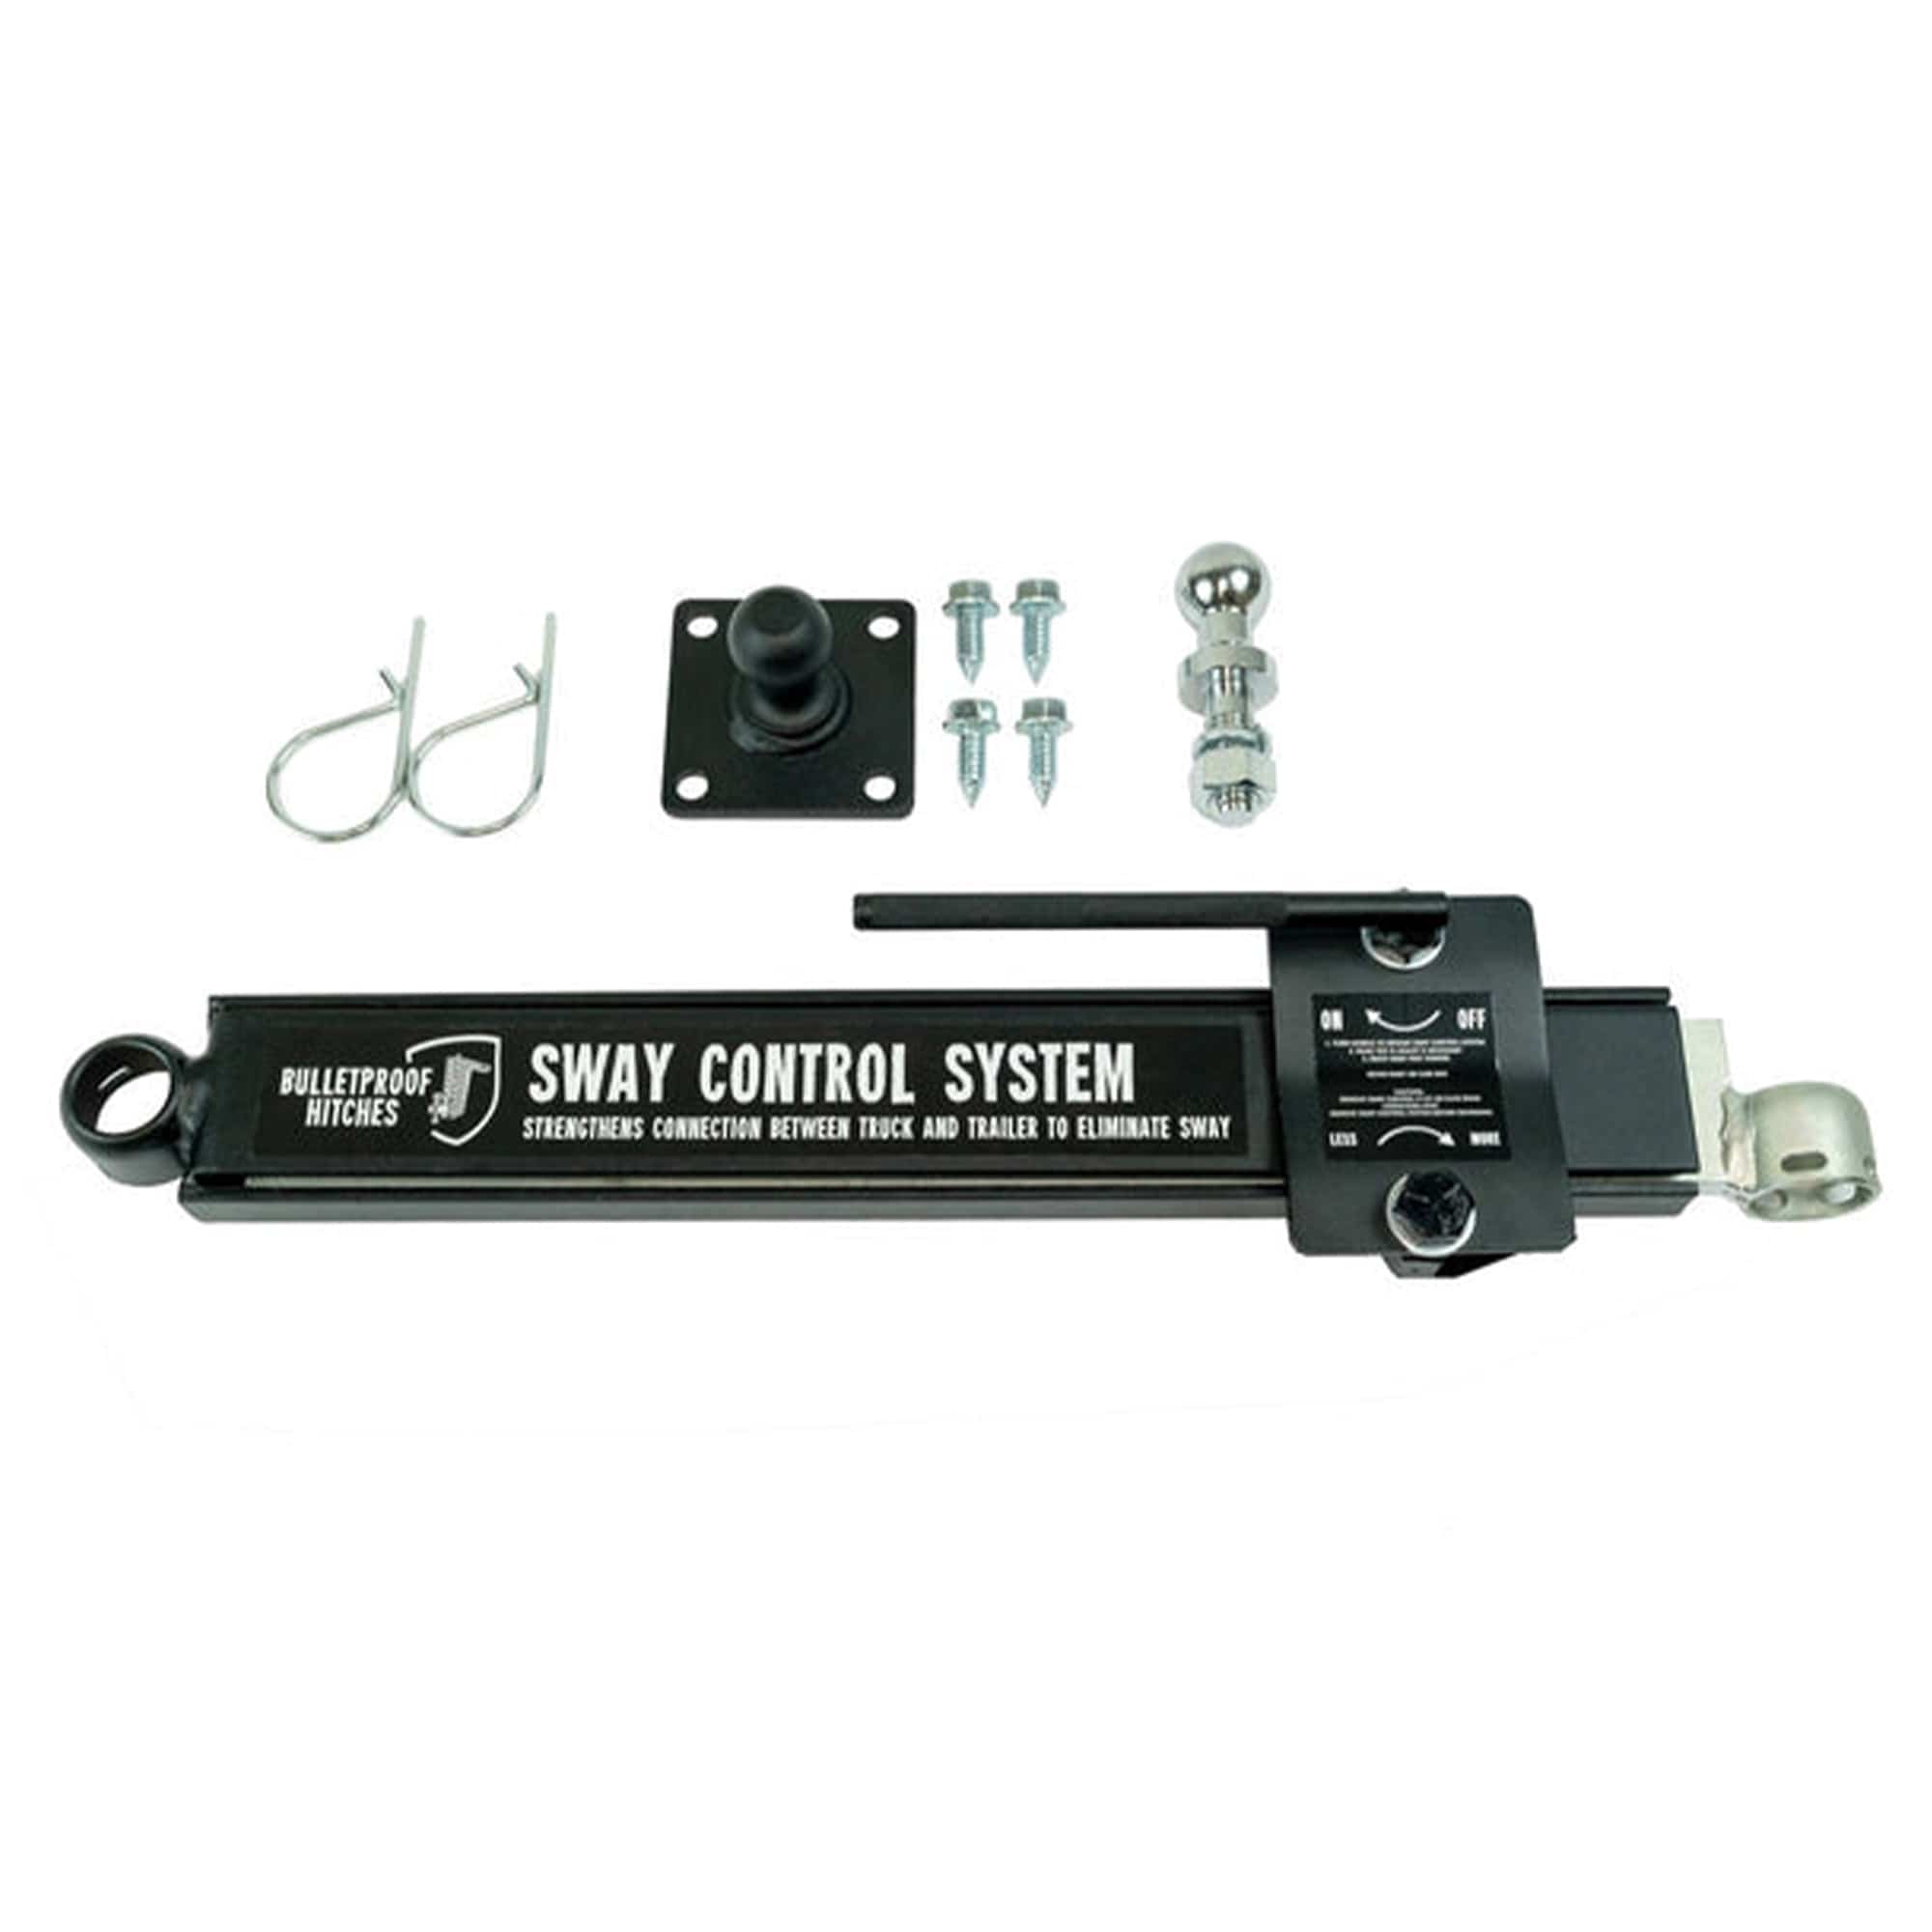 Bulletproof Hitches SWAYCONTROL Sway Control System